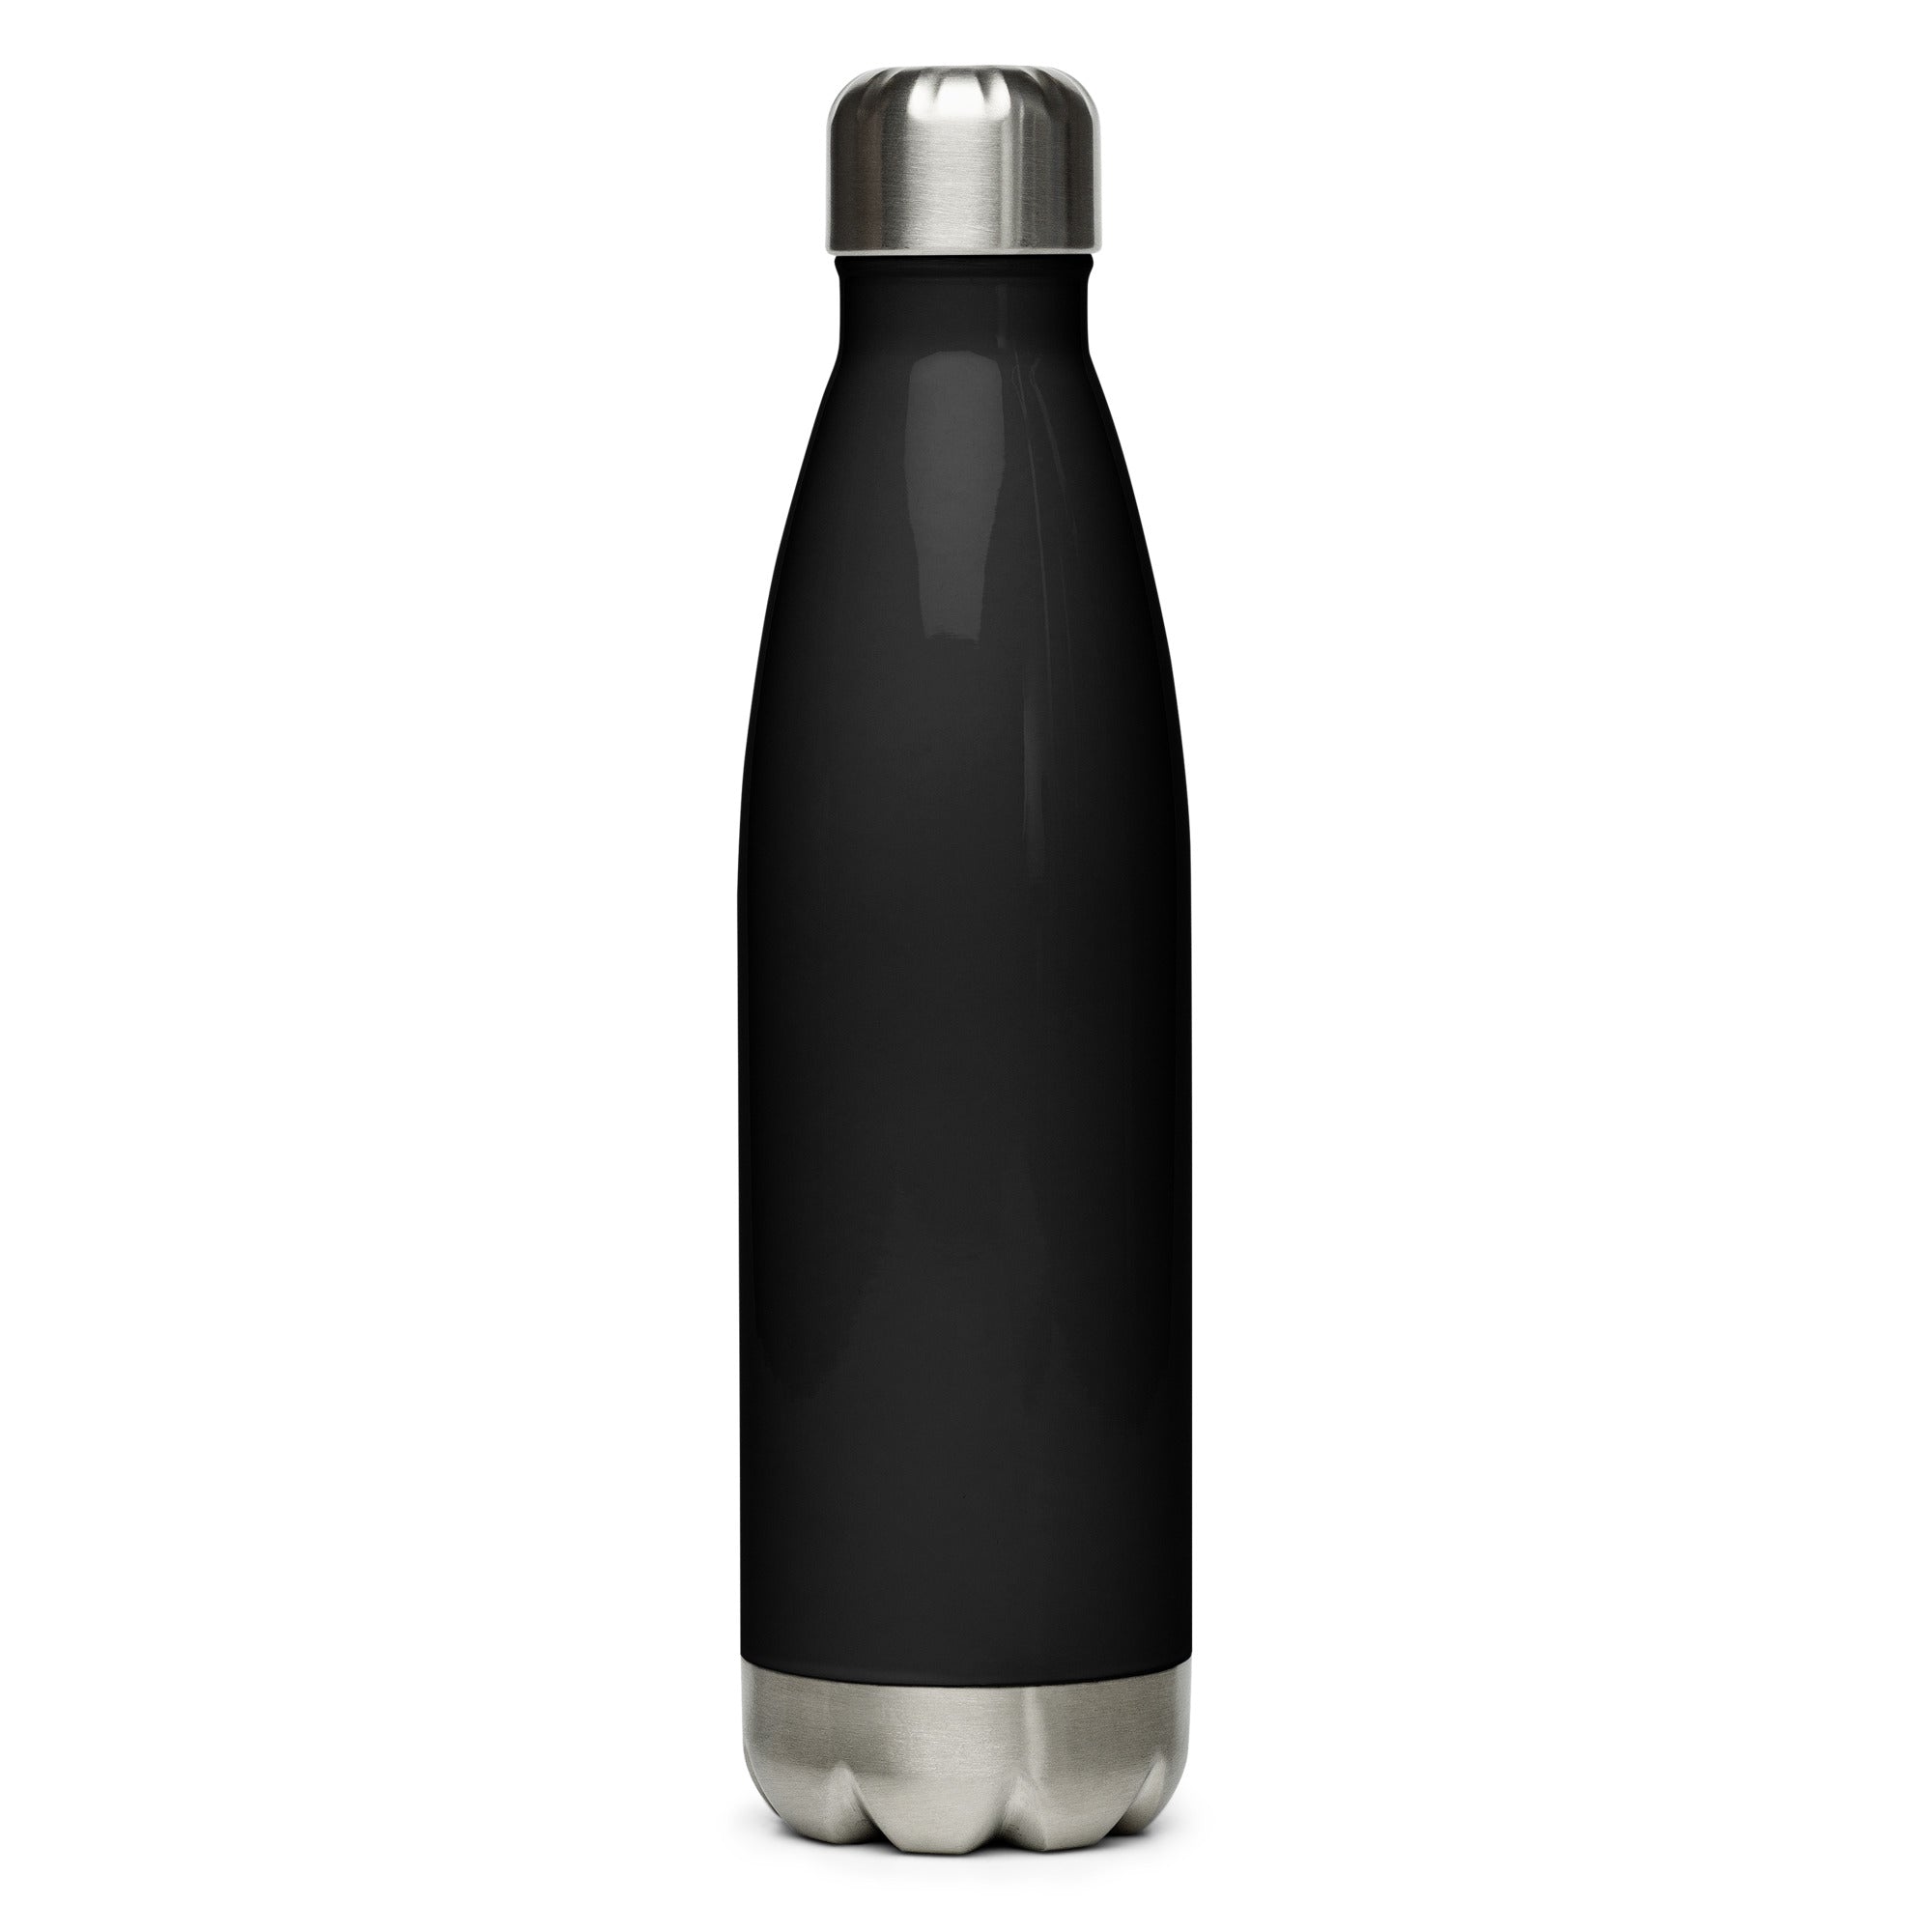 Way Truth Life Radio Stainless Steel Water Bottle